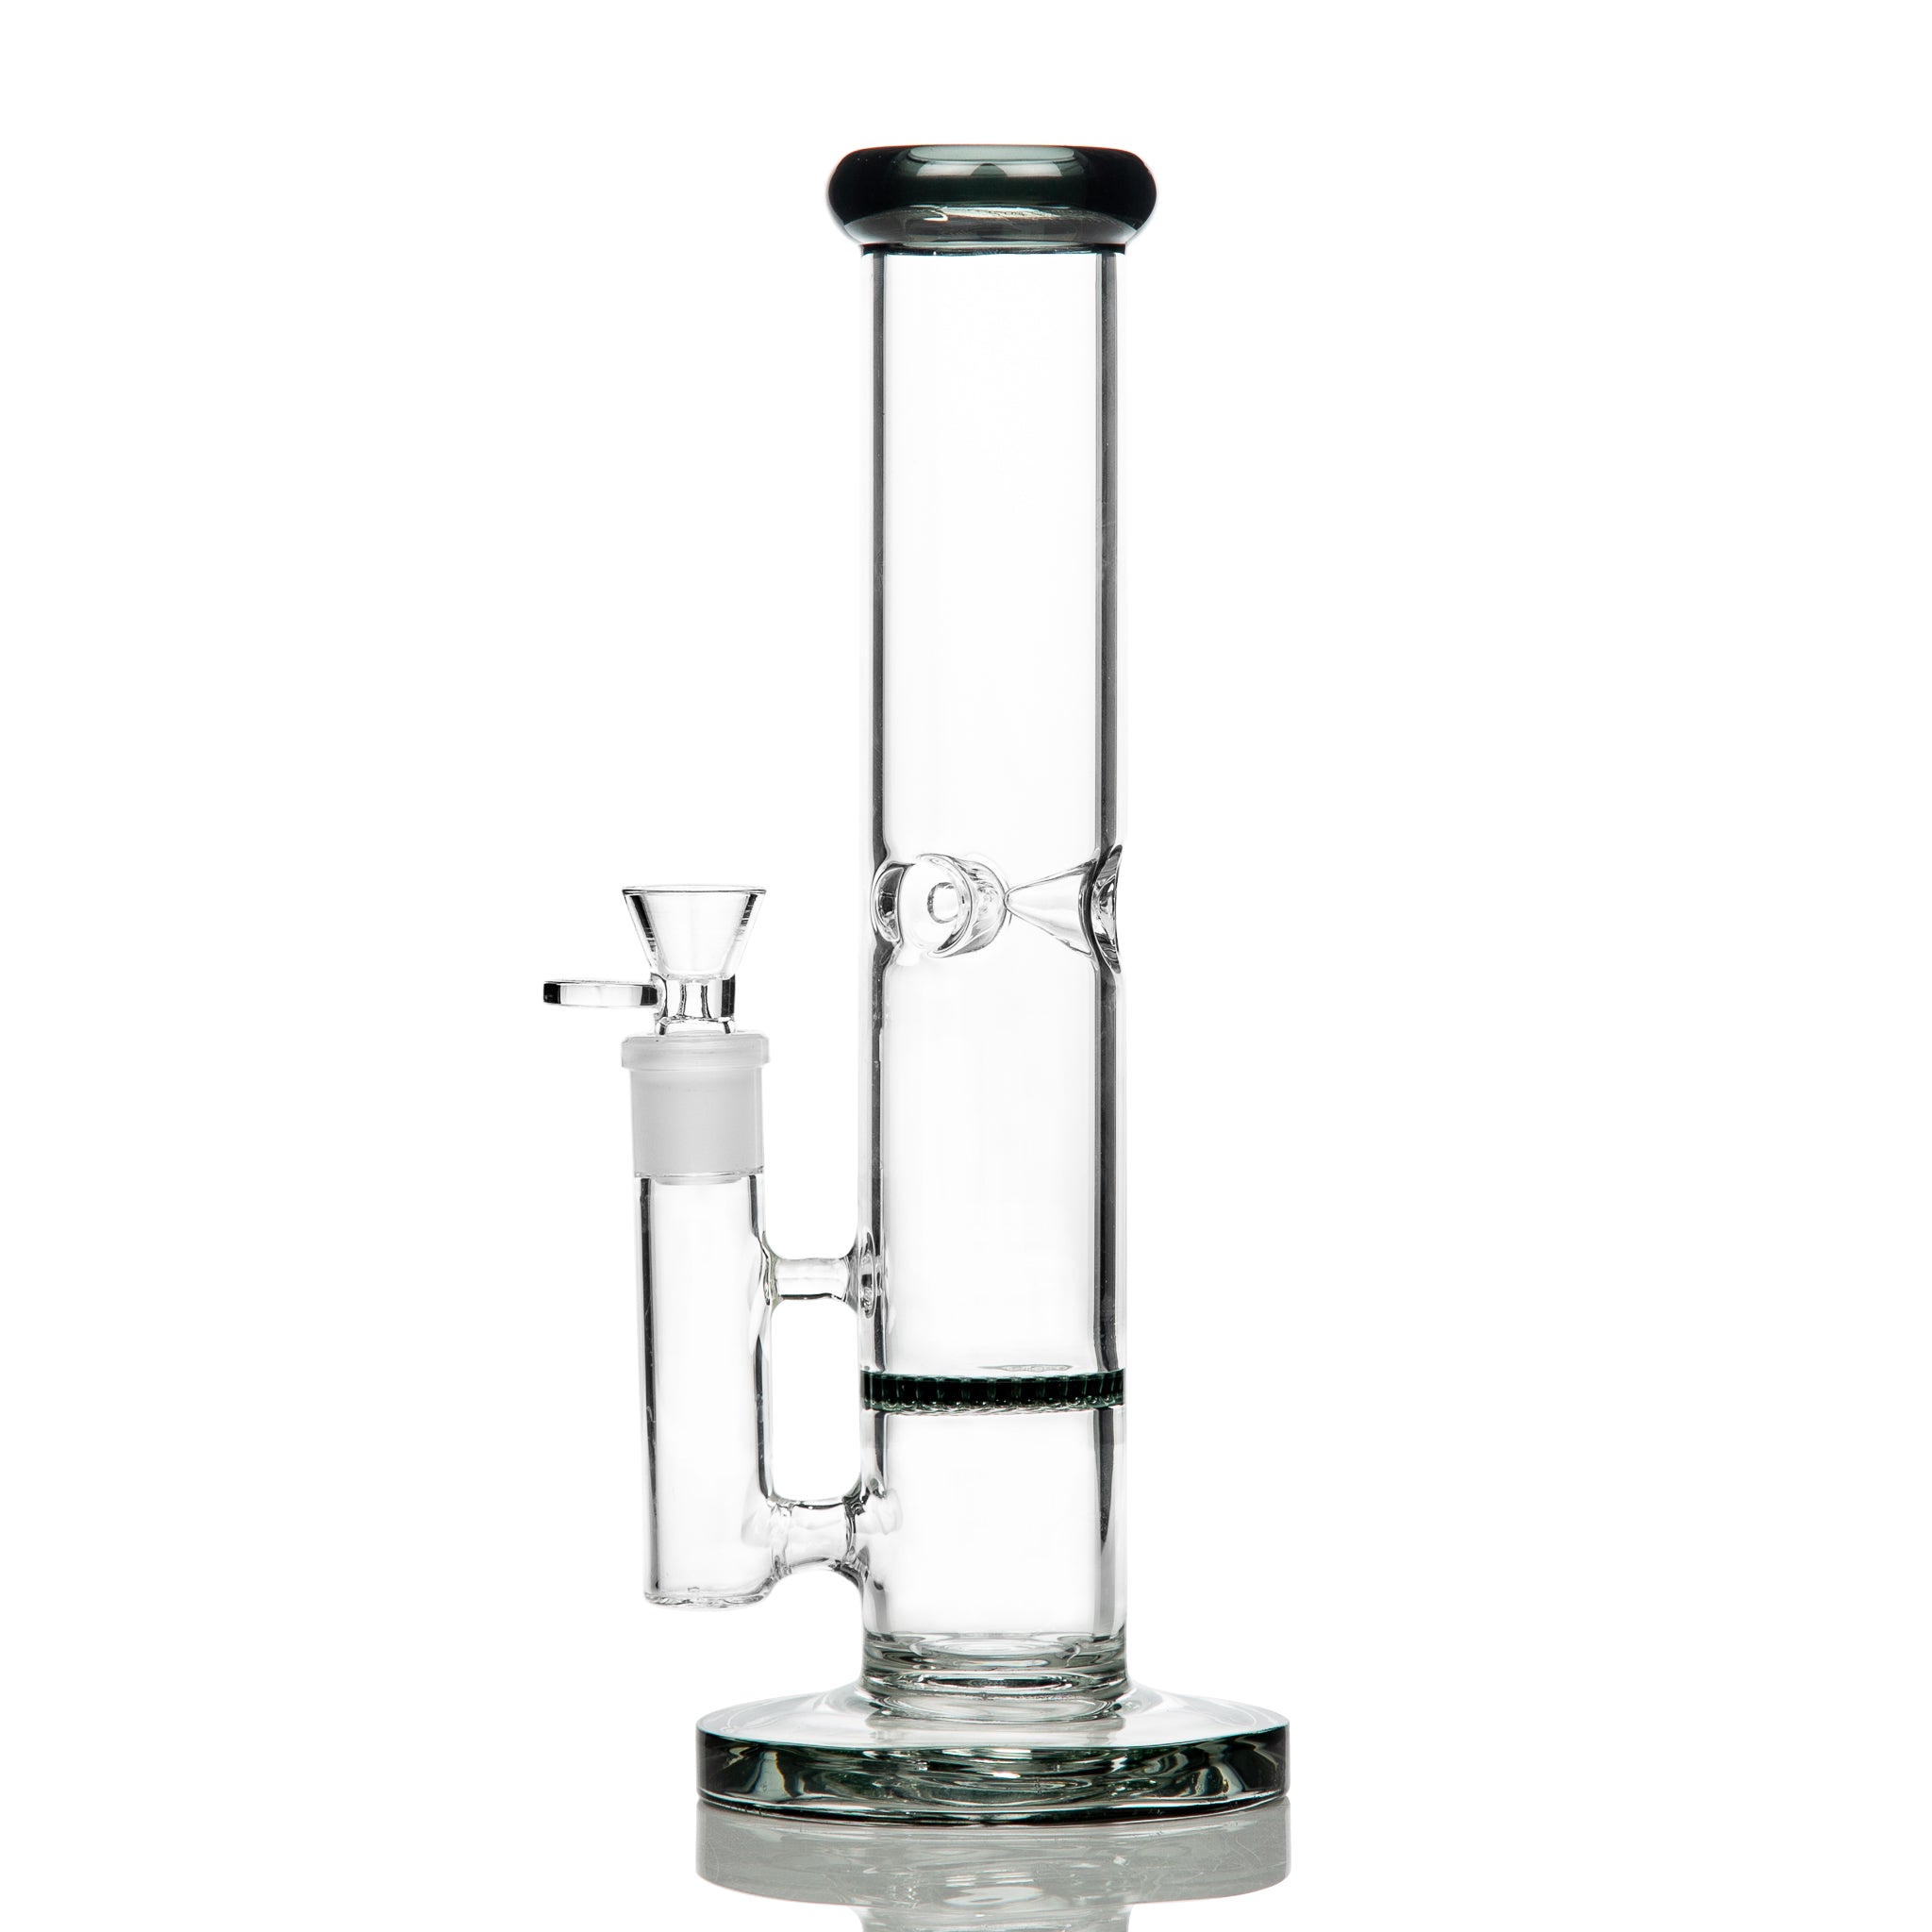 Cheap bong from Easy in NSW Australia with honeycomb perc.